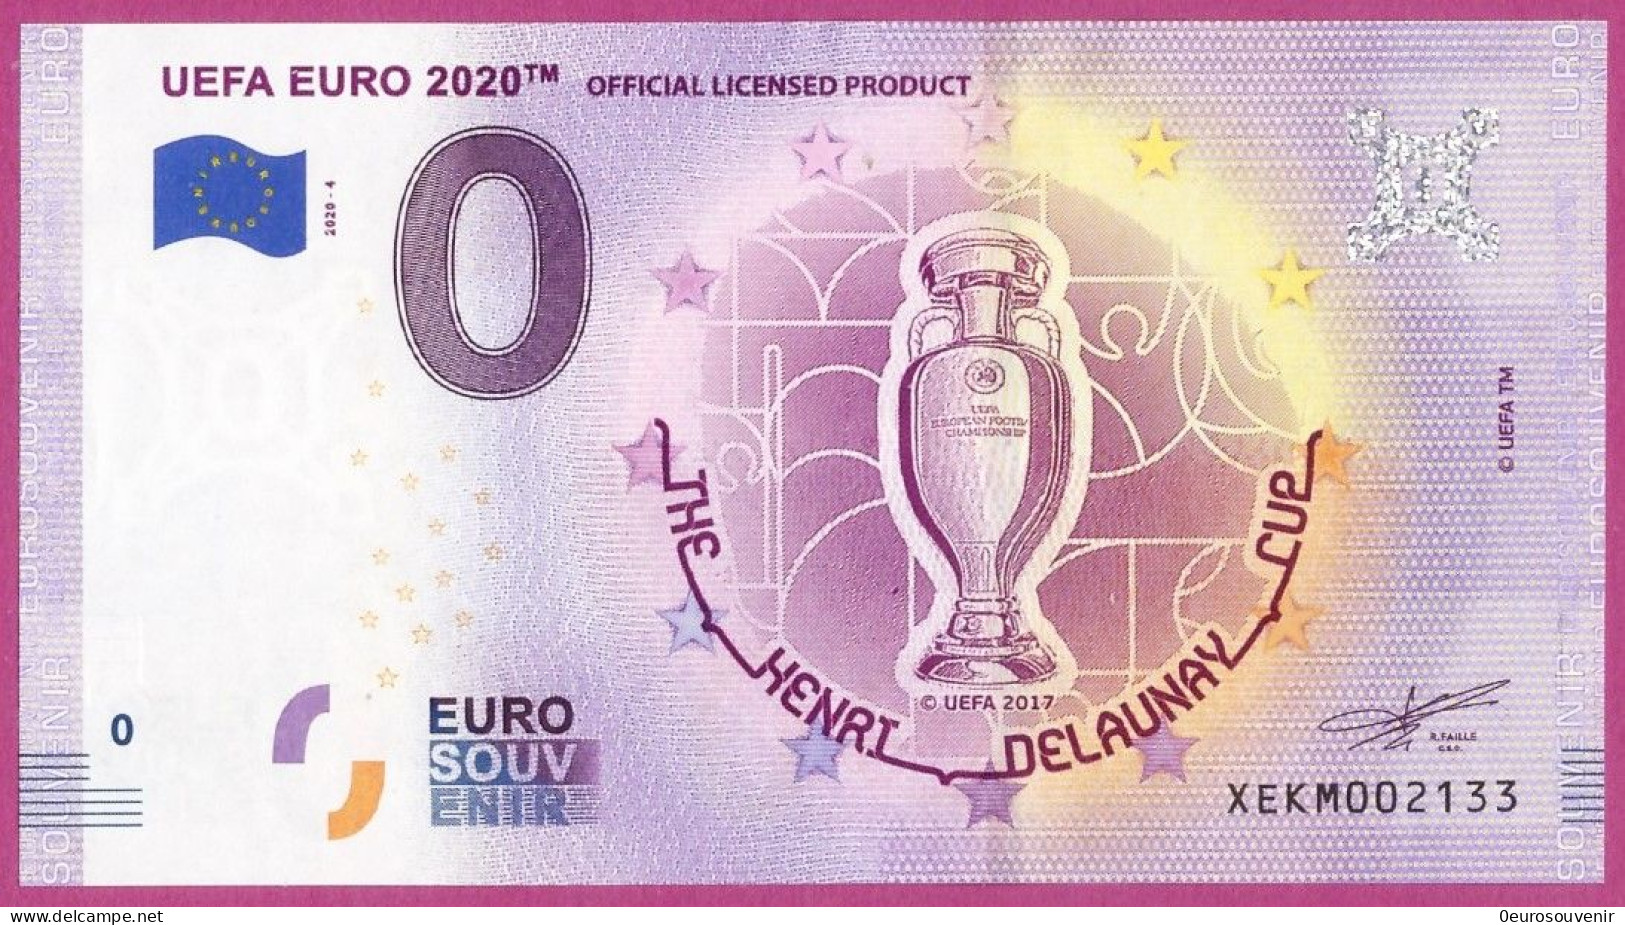 0-Euro XEKM 2020-4 UEFA EURO 2020 - OFFICIAL LICENSED PRODUCT - Privatentwürfe